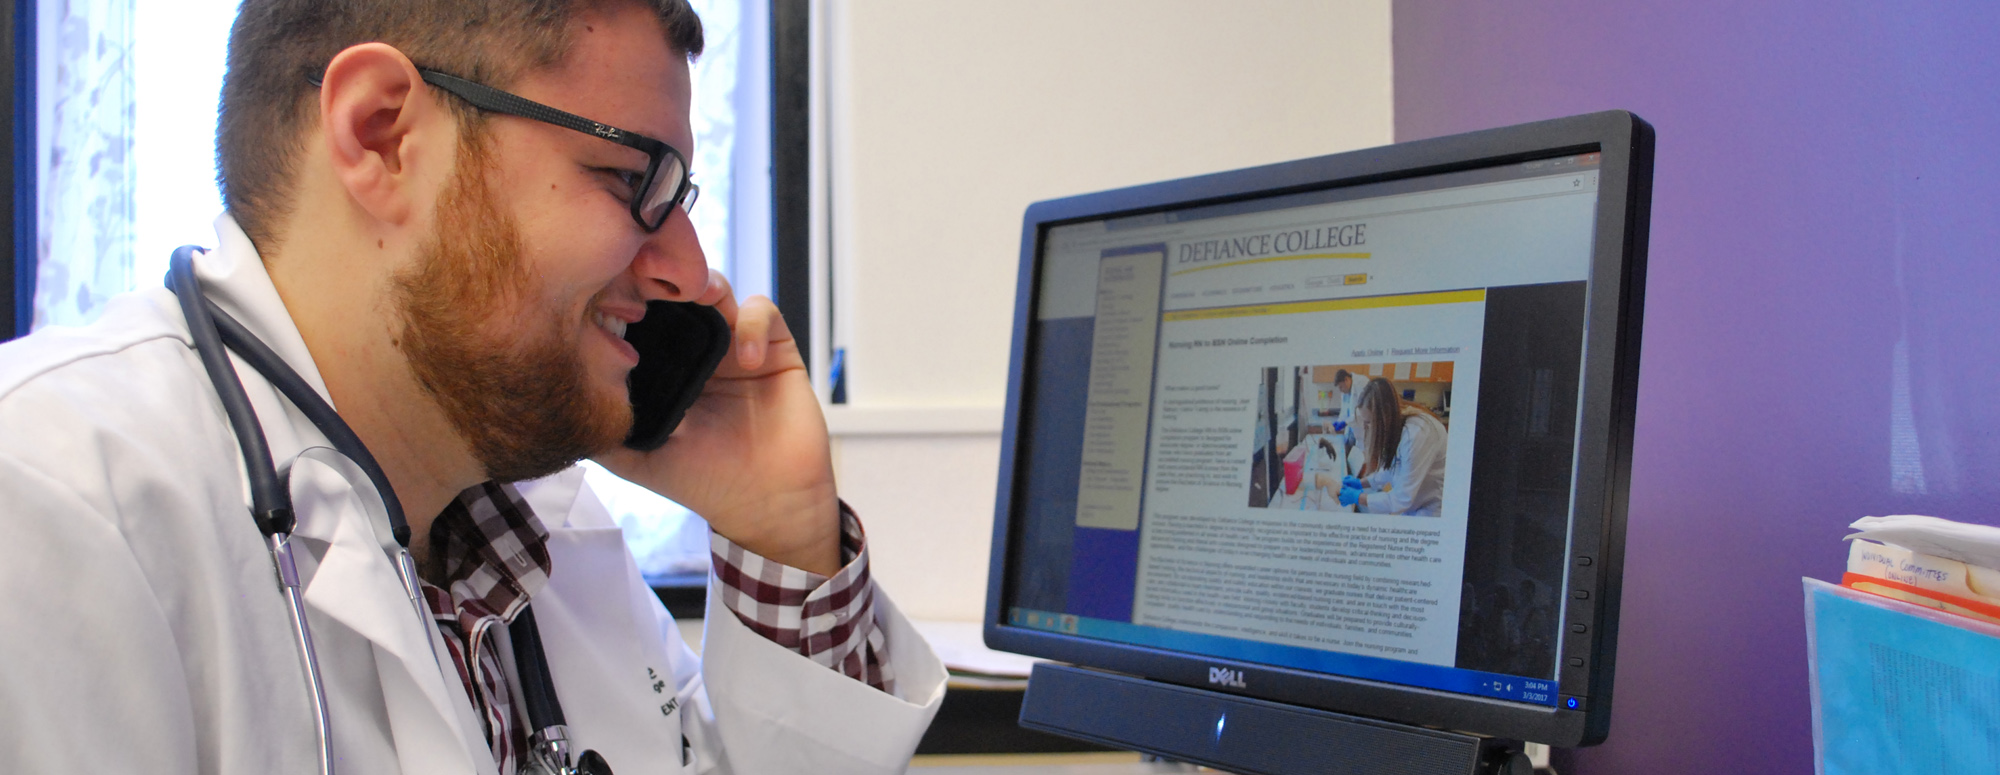 male student in white nurse jacket talking on telephone while sitting at a desk and looking at a computer screen that is displaying the Defiance College nursing webpage.